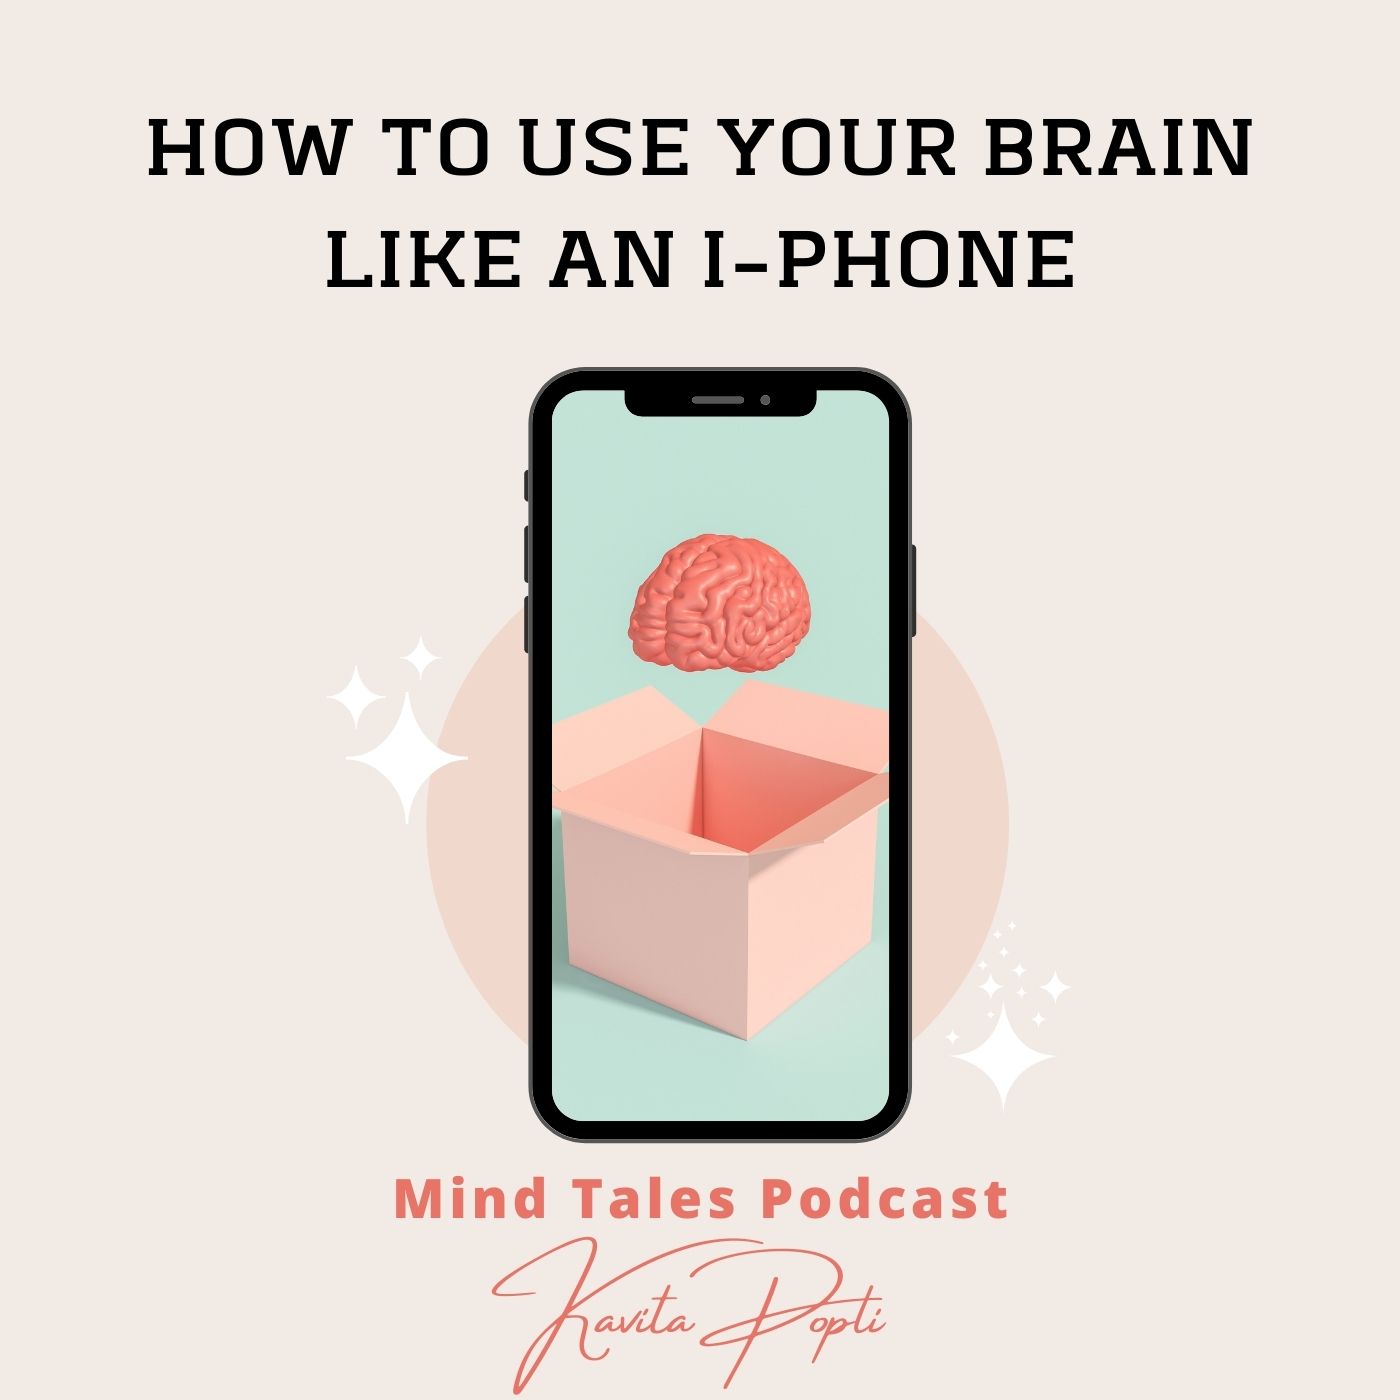 Episode 77 - How to use your brain like an i-phone